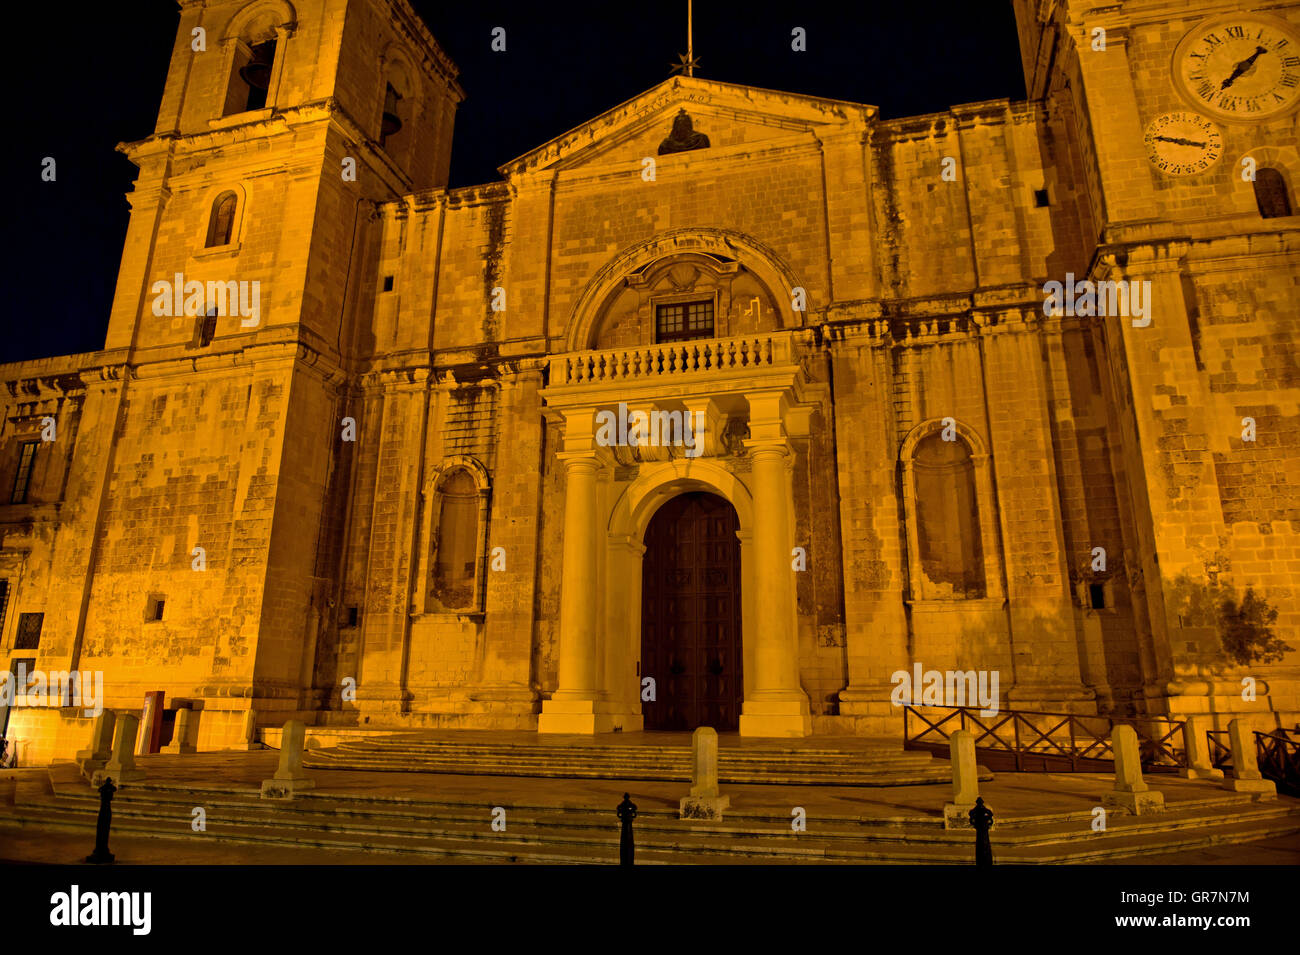 Main Facade Of The St. Johns Co-Cathedral Valletta, European Capital Of Culture 2018, Malta Stock Photo